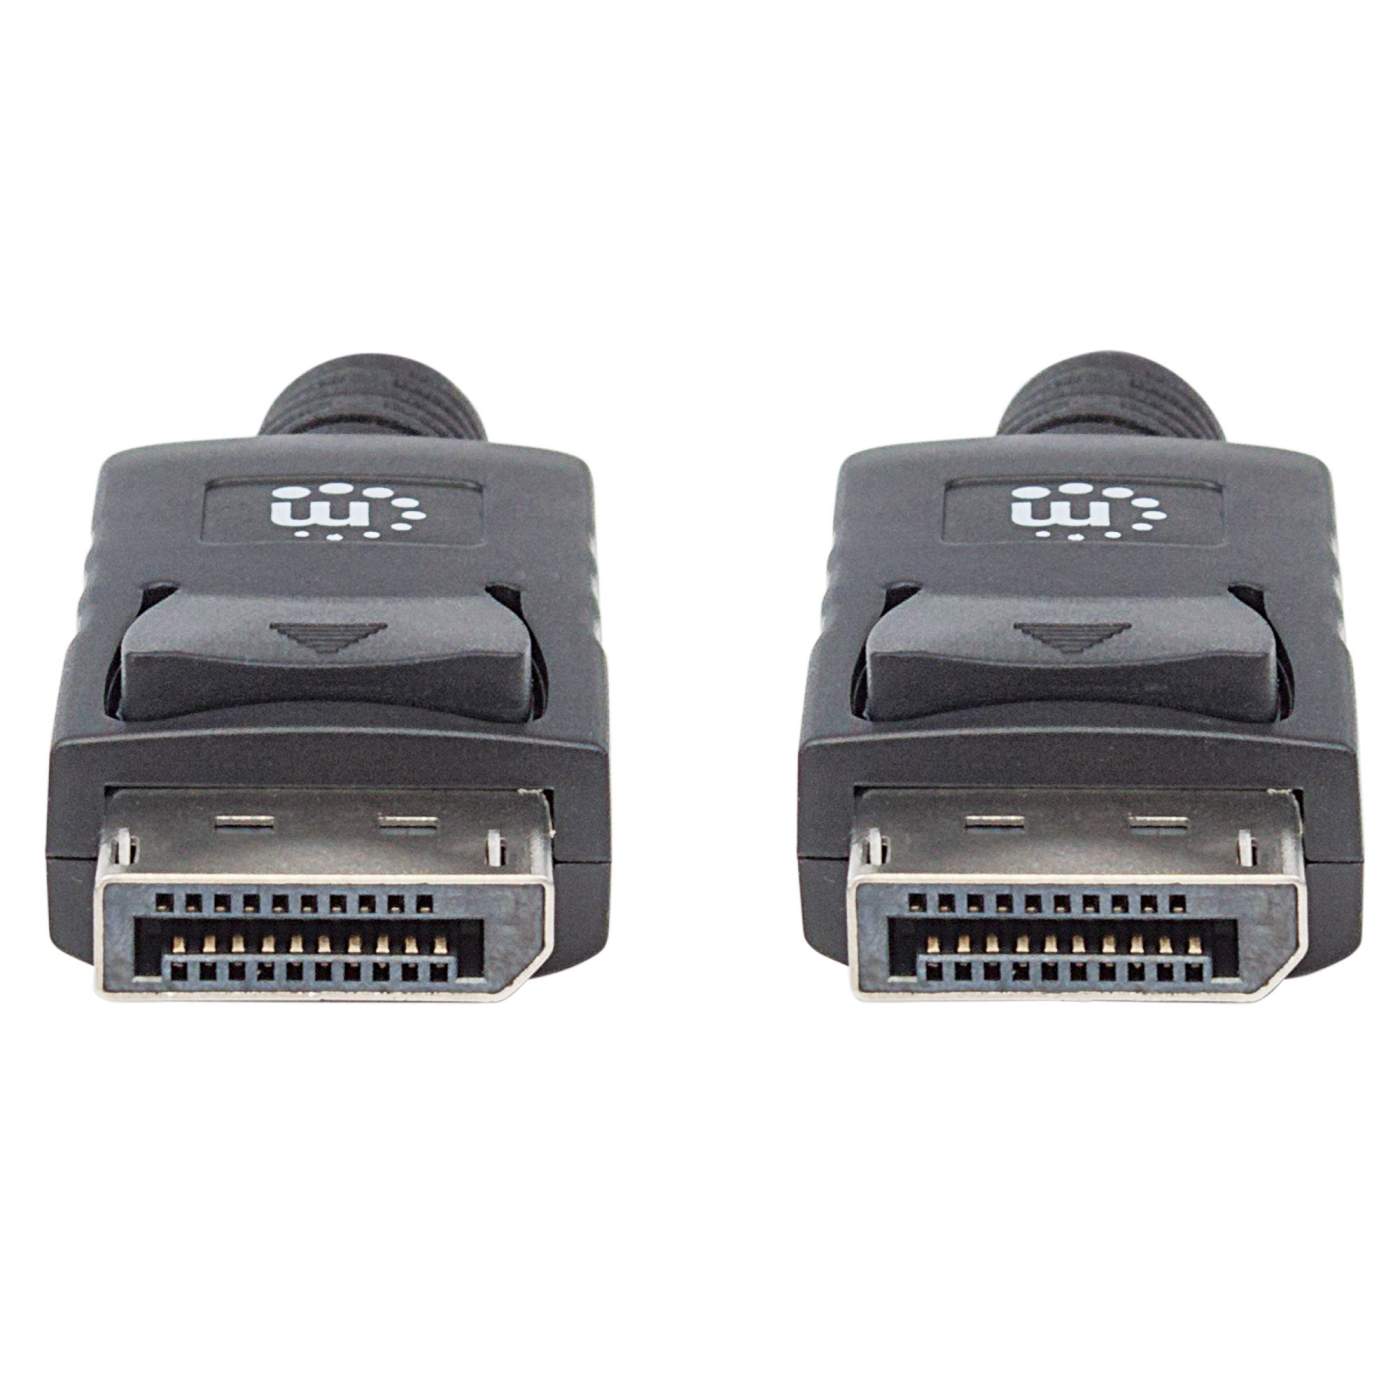 1080p DisplayPort Monitor Cable Image 3